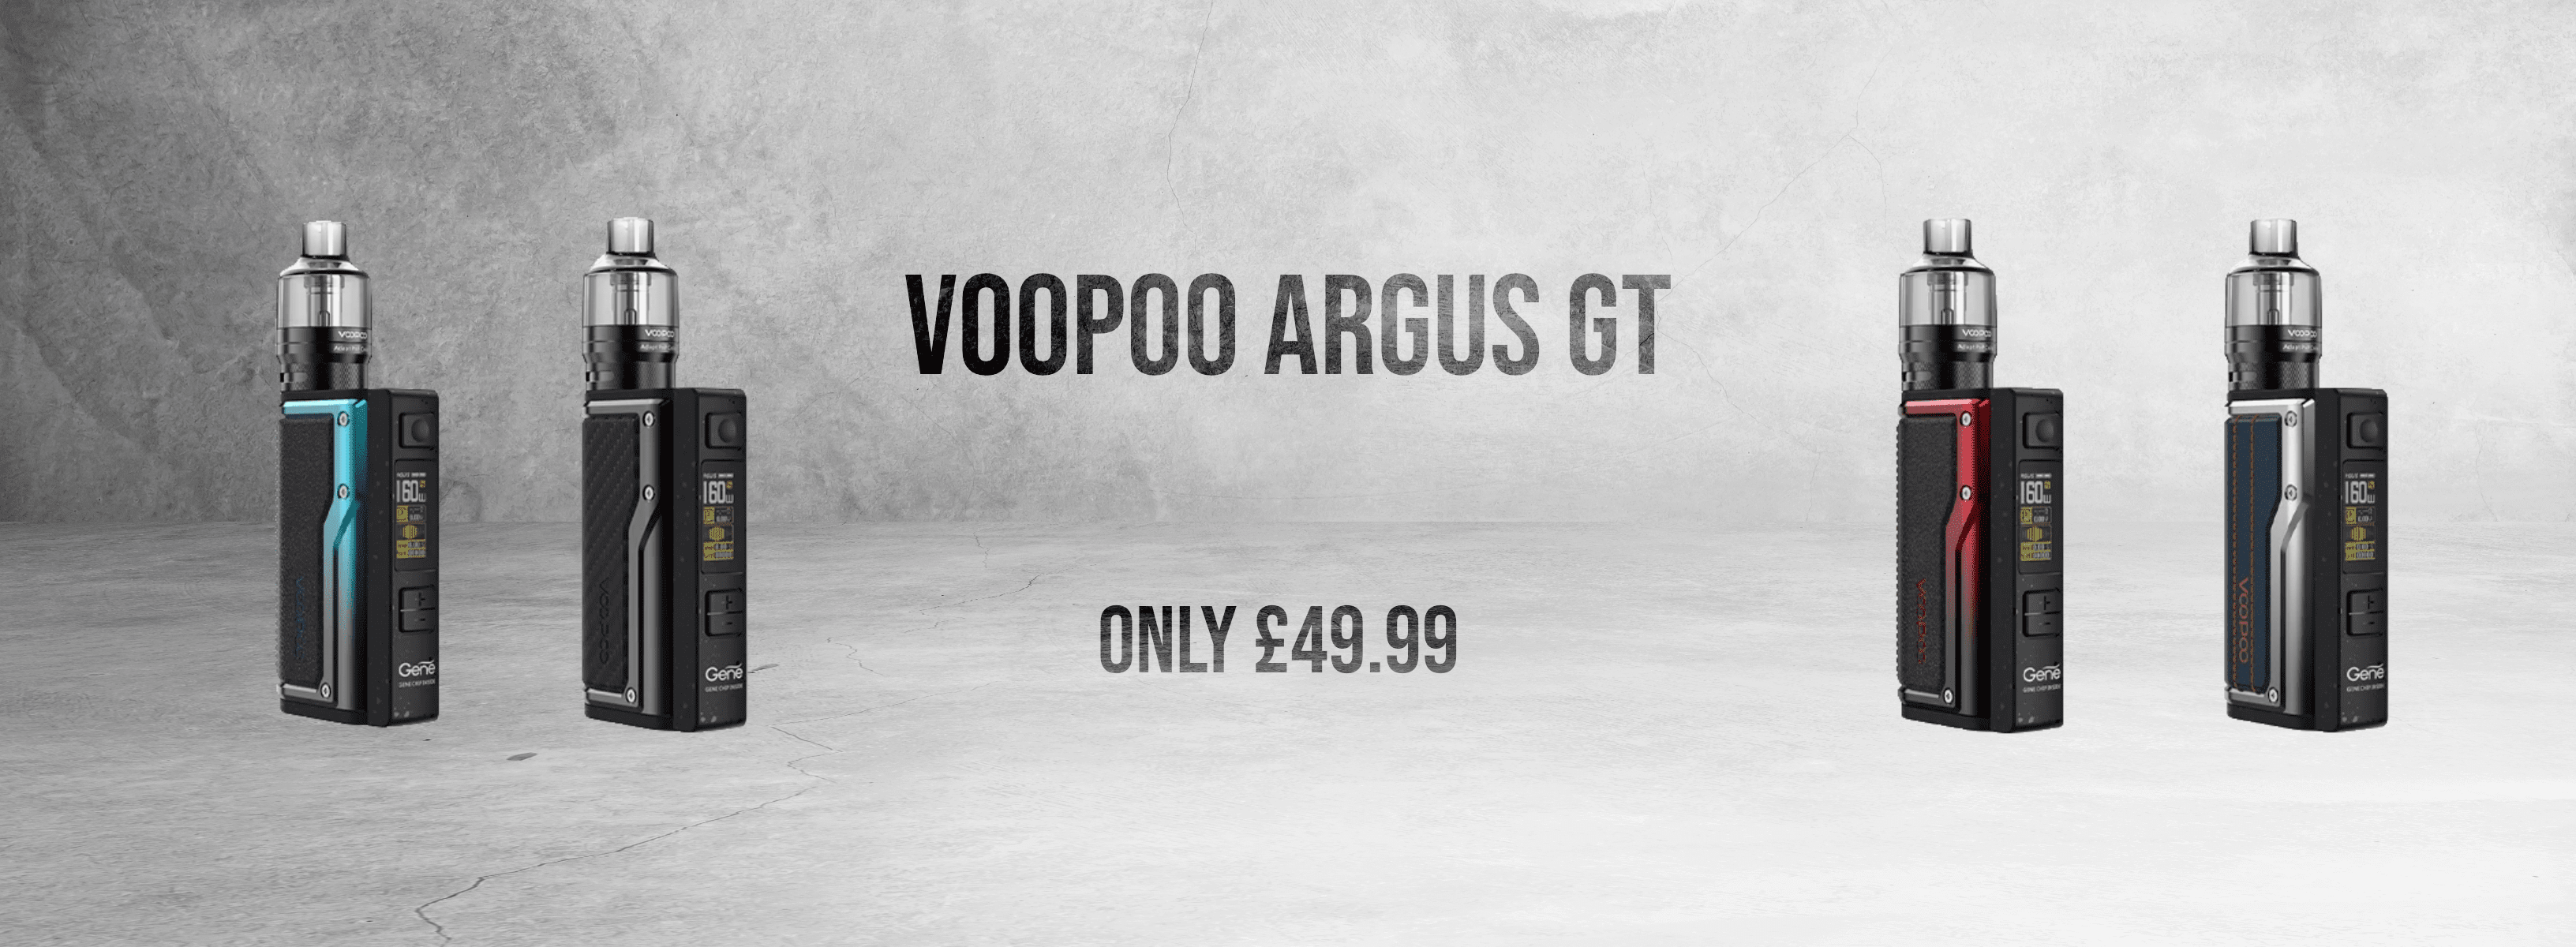 Advert for the VooPoo Argus GT